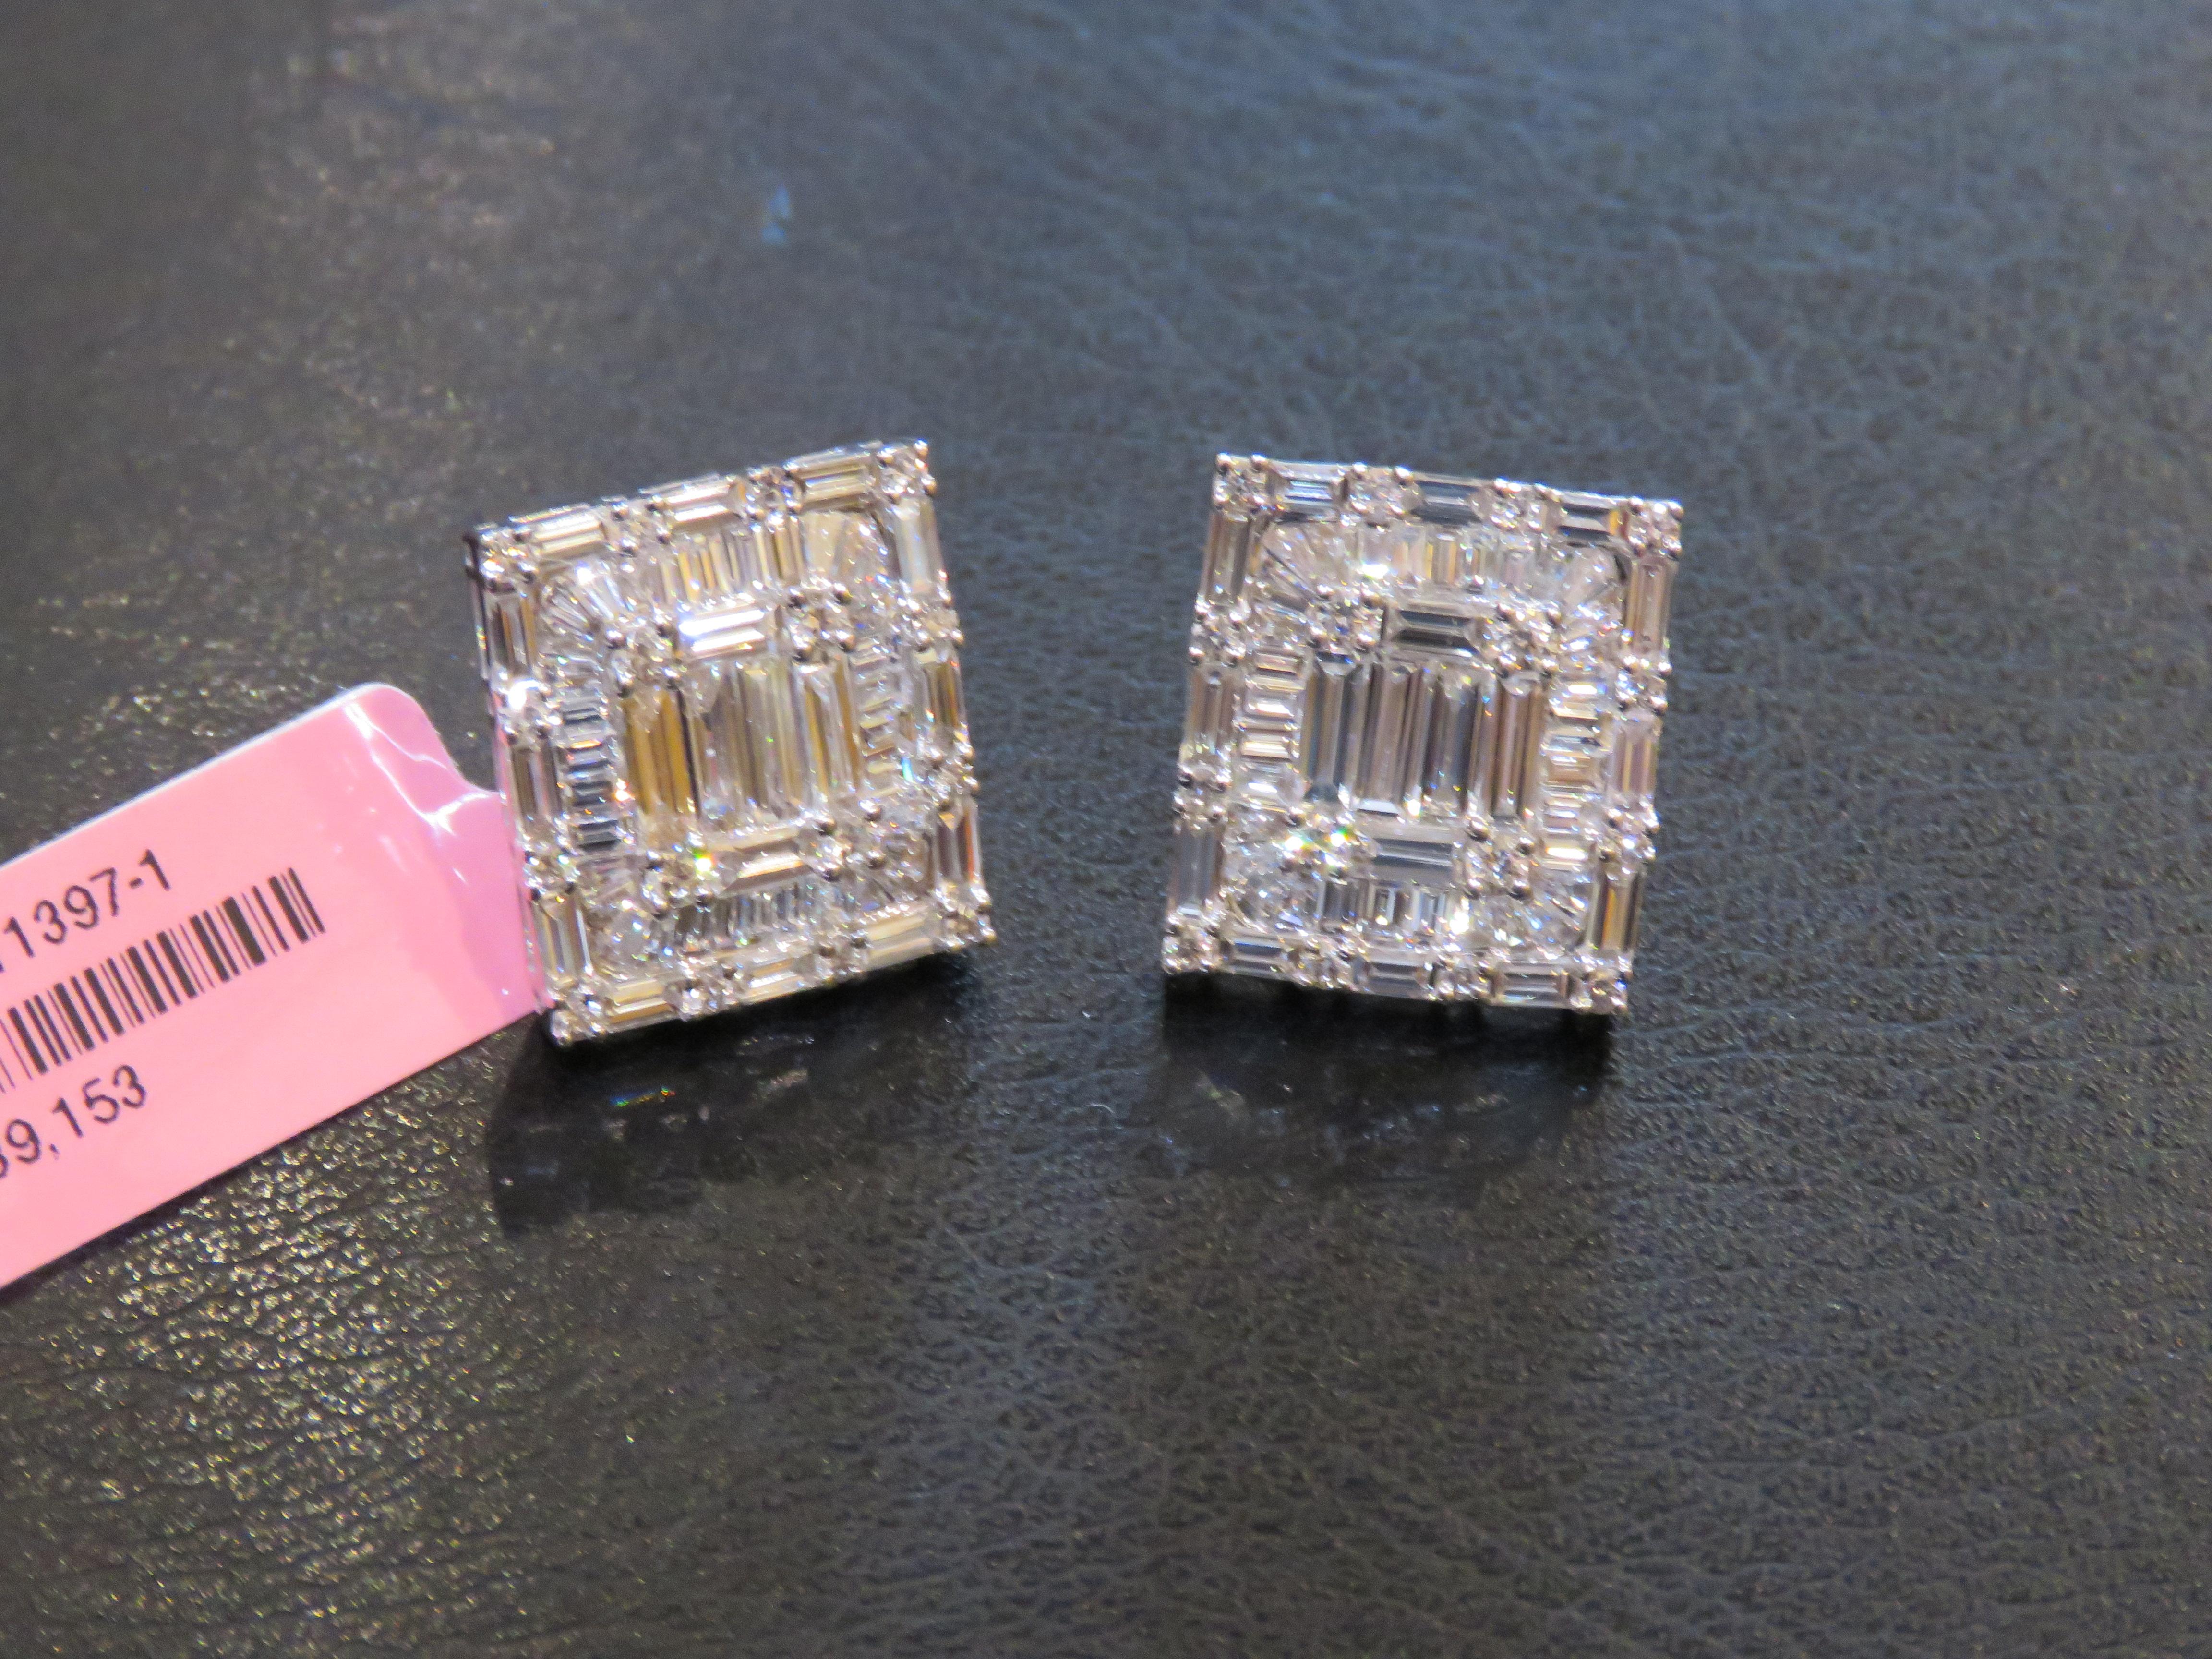 The Following Item we are offering are these Beautiful Important Rare 18KT White Gold Brilliant Large 4CT Emerald Cut Diamond Stud Earrings. Each Earring is Magnificently adorned with a Beautiful Halo and are comprised of Magnificent Glittering